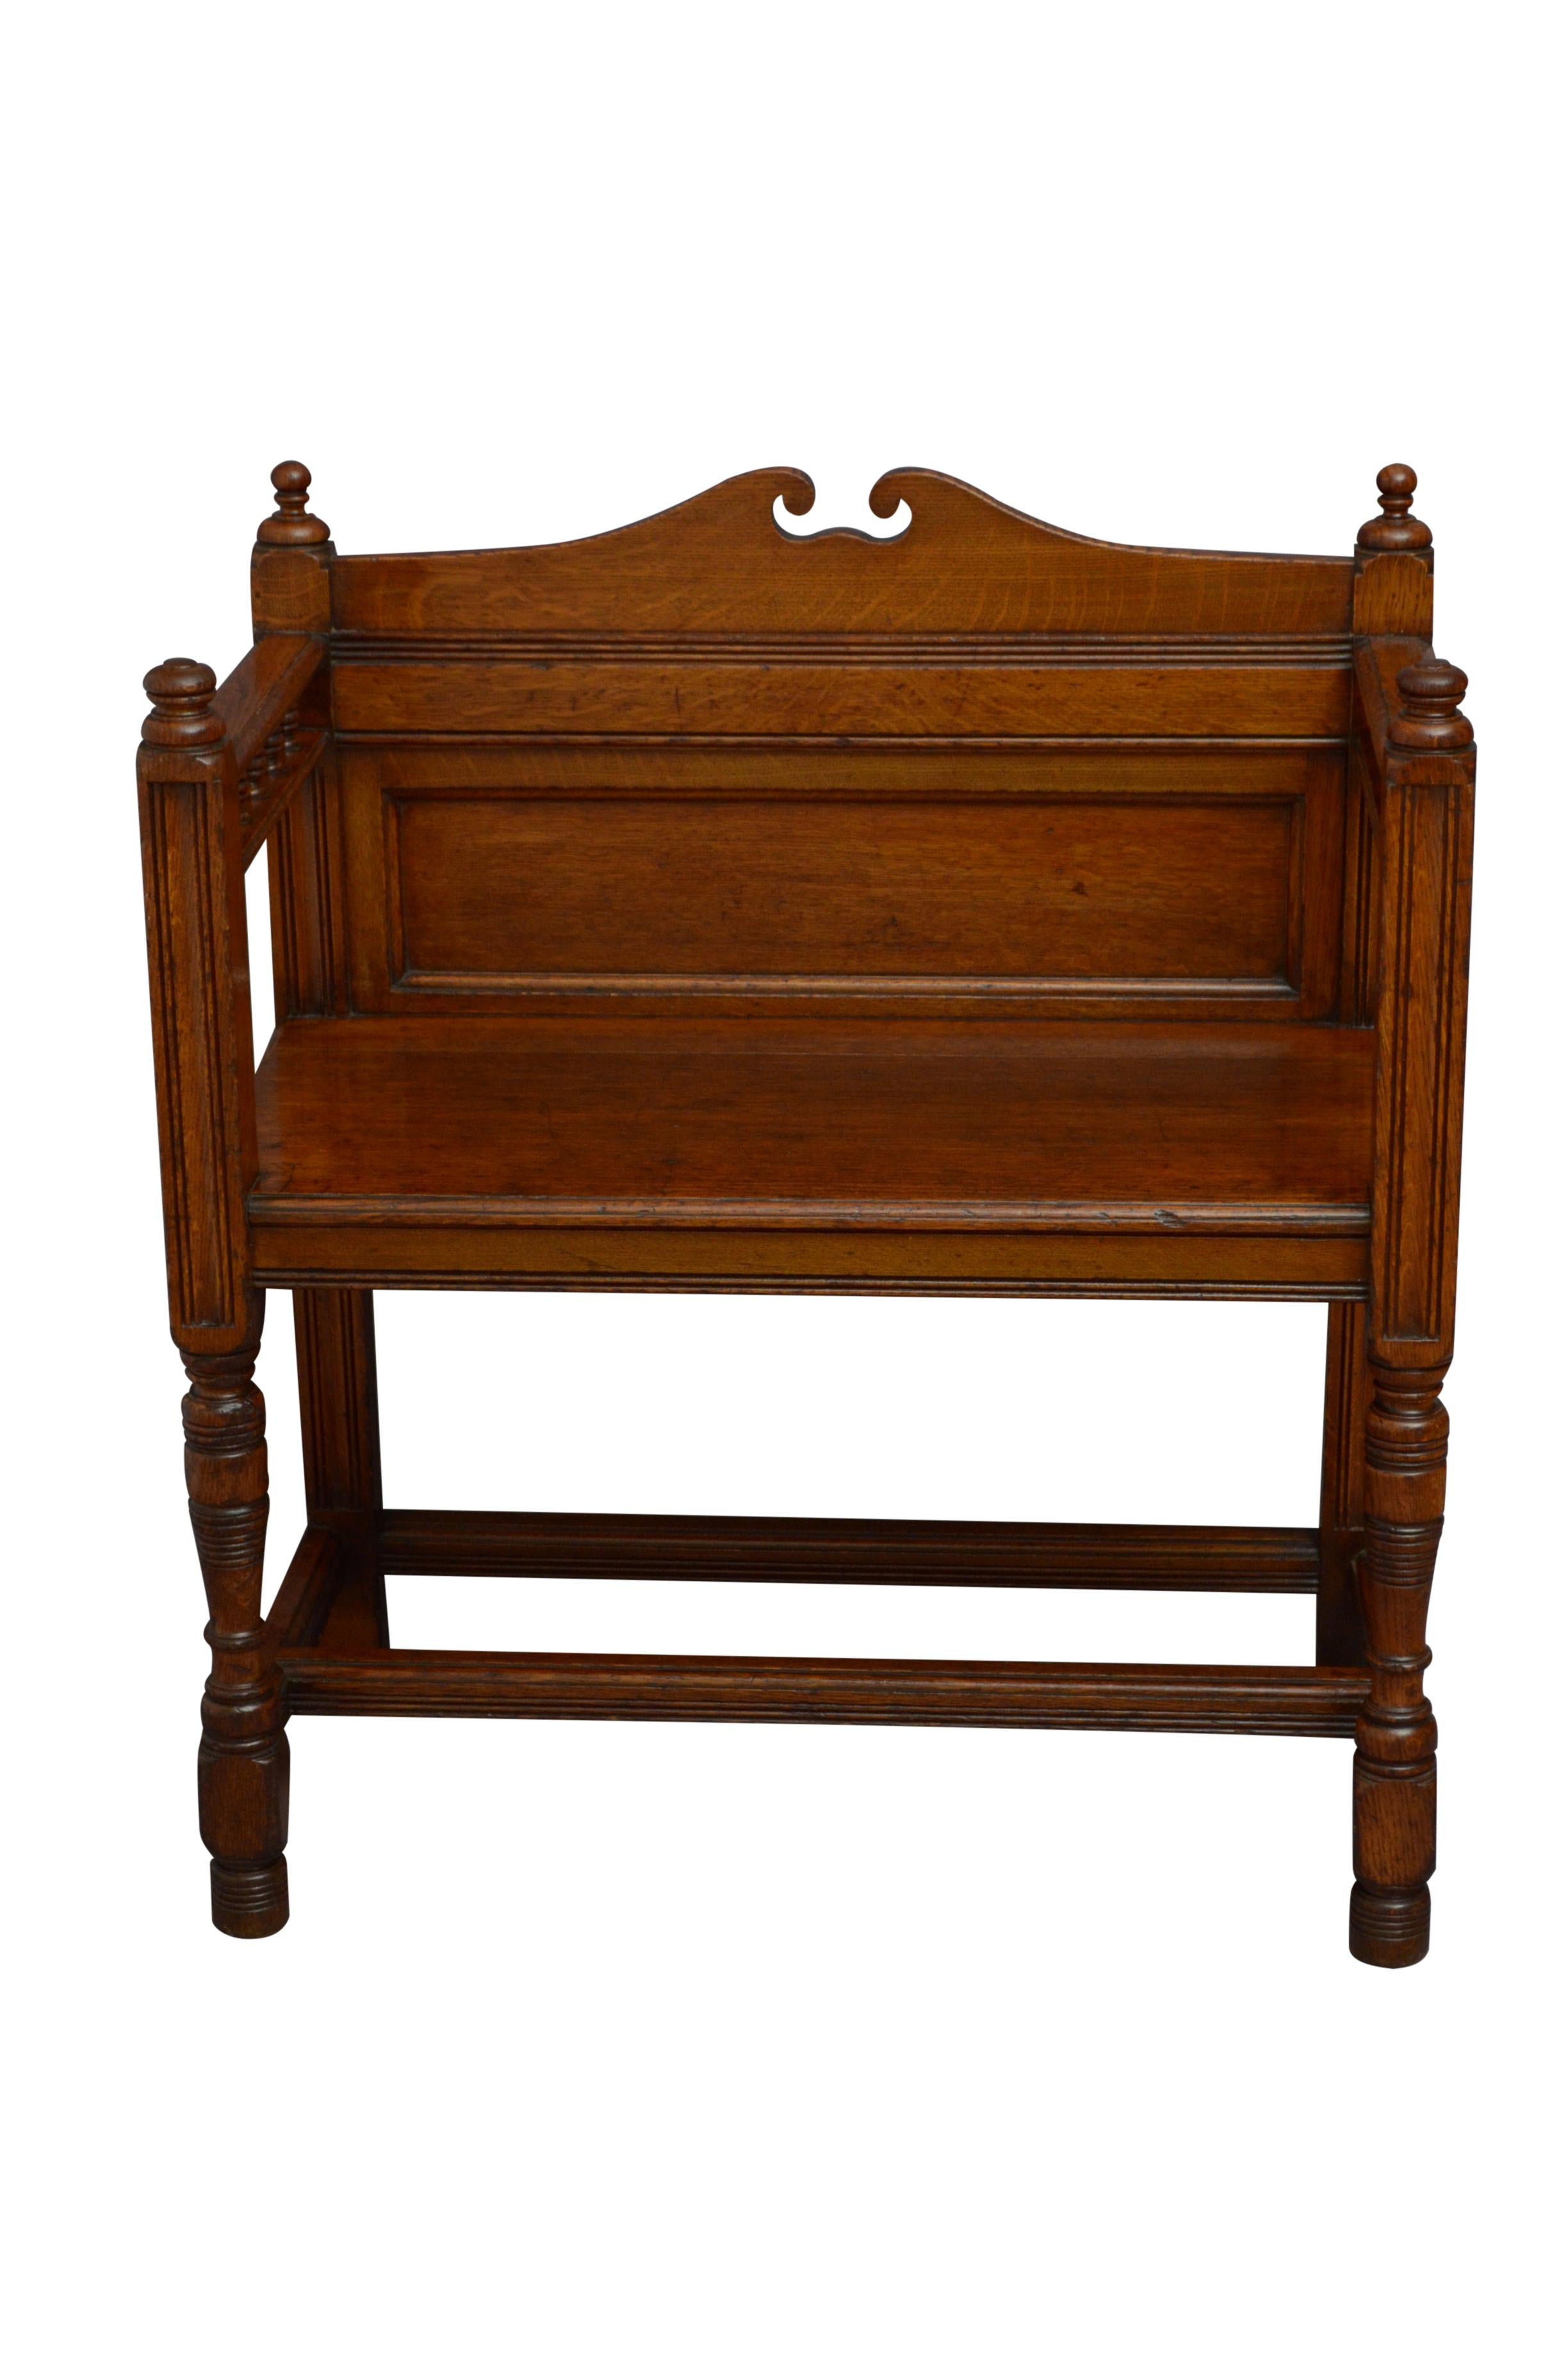 K0518 Very attractive Victorian hall seat, having shaped top rail with moulded and panelled back, open arms with decorative spindles and moulded seat, standing on panelled supports terminating in turned legs united by double stretchers. This antique